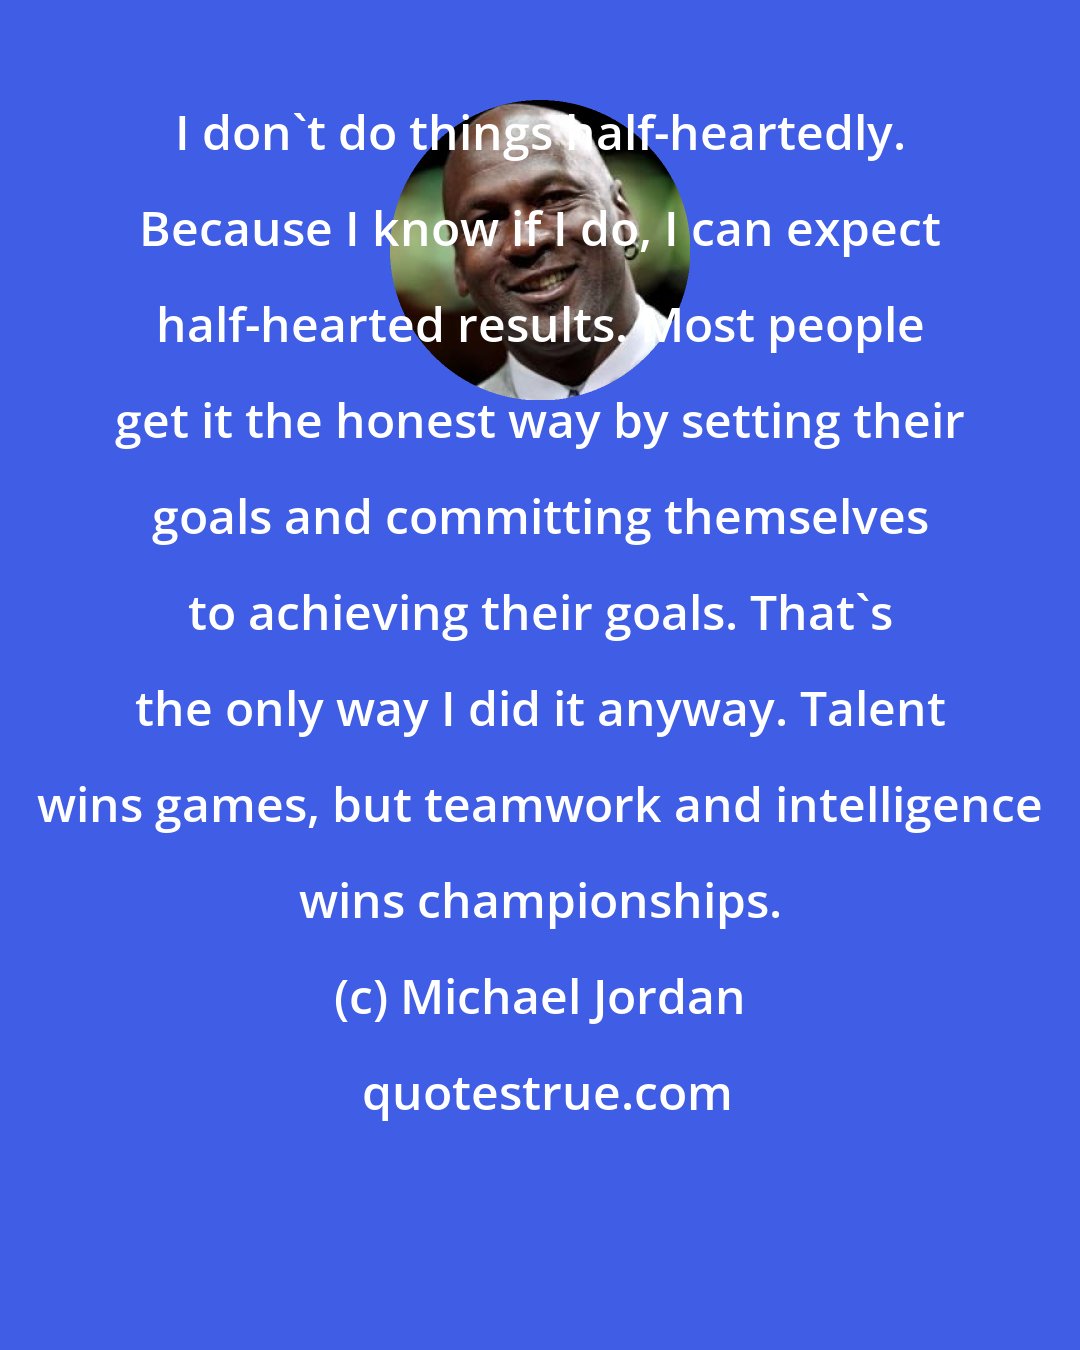 Michael Jordan: I don't do things half-heartedly. Because I know if I do, I can expect half-hearted results. Most people get it the honest way by setting their goals and committing themselves to achieving their goals. That's the only way I did it anyway. Talent wins games, but teamwork and intelligence wins championships.